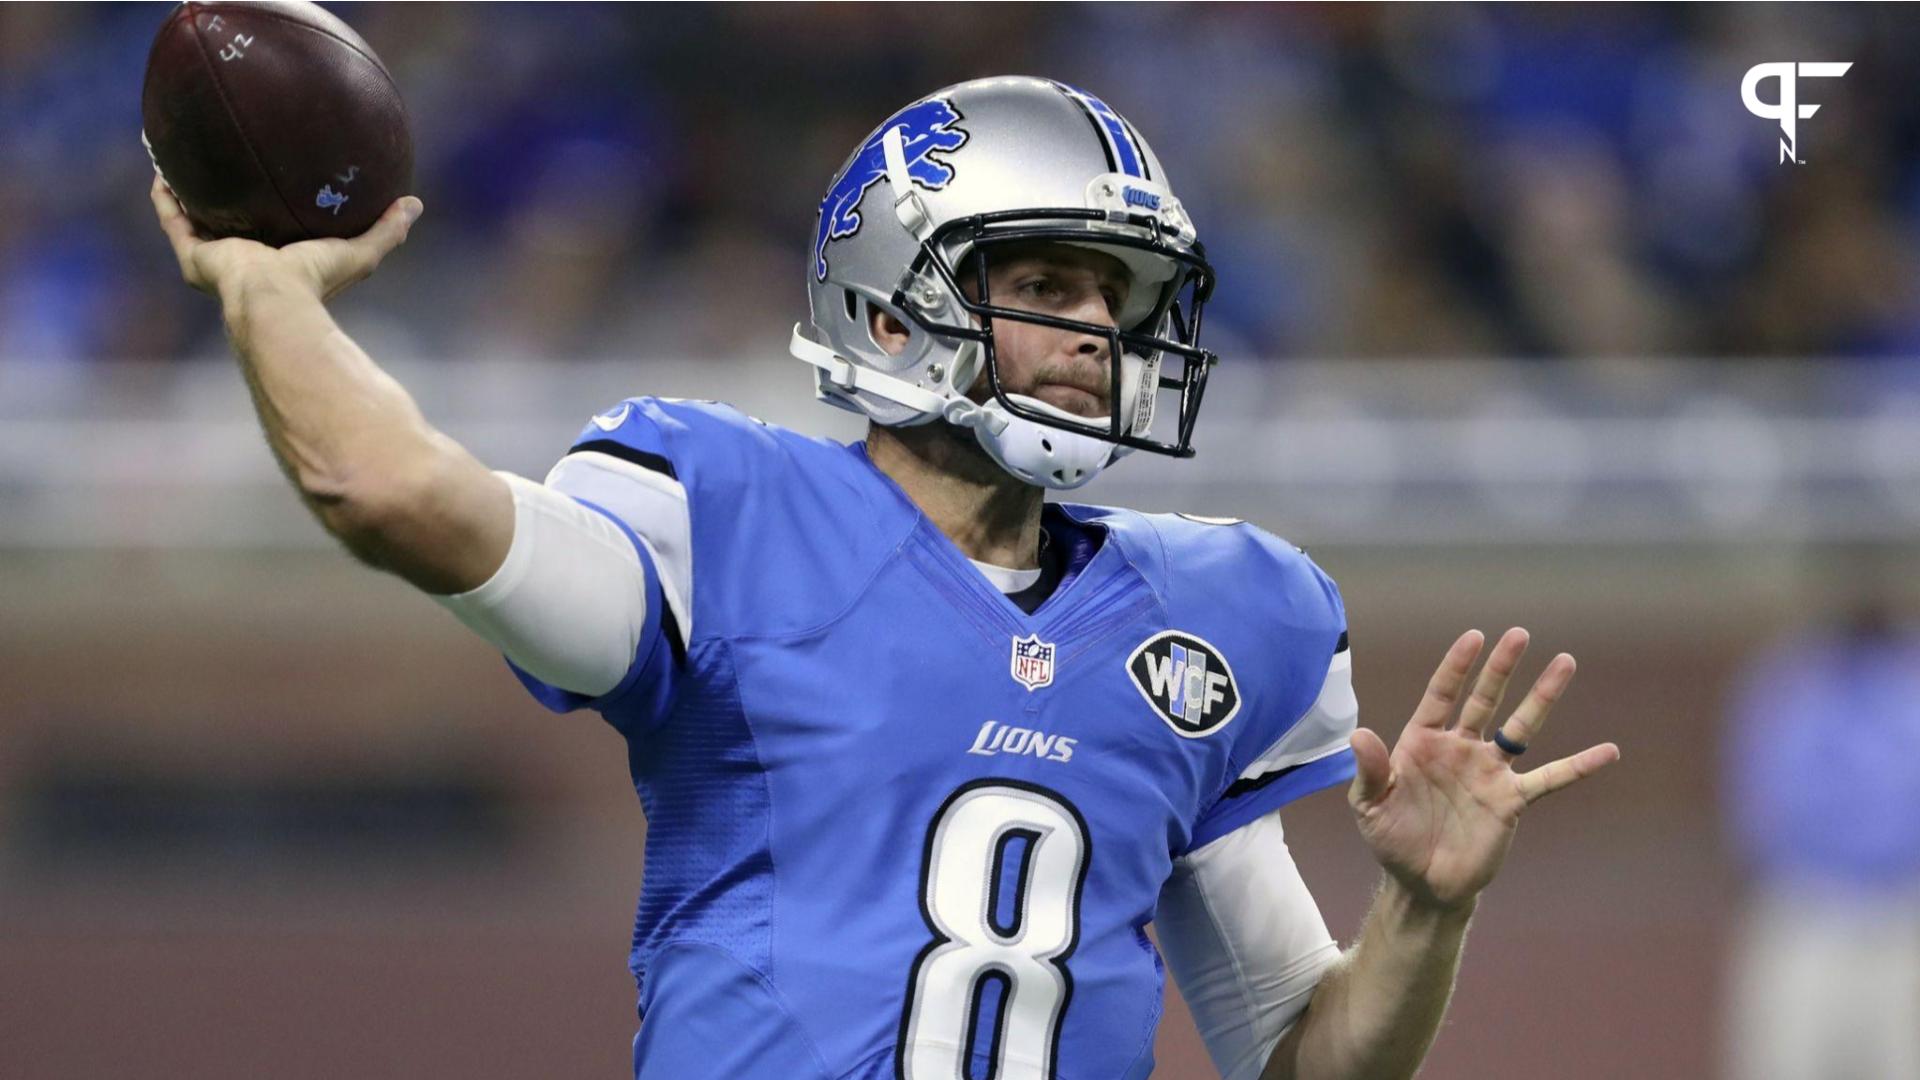 NFL Personality Rips Dan Orlovsky for His NFL Career - “He Was a Scrub!”